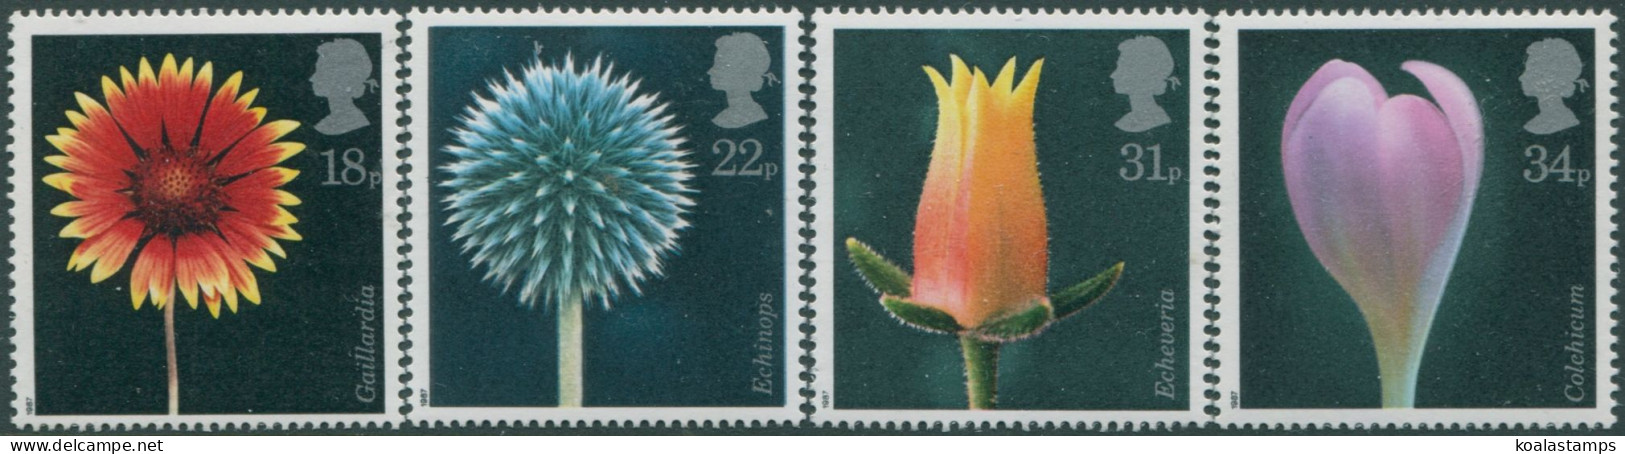 Great Britain 1987 SG1347-1350 QEII Flower Photography Set MNH - Unclassified